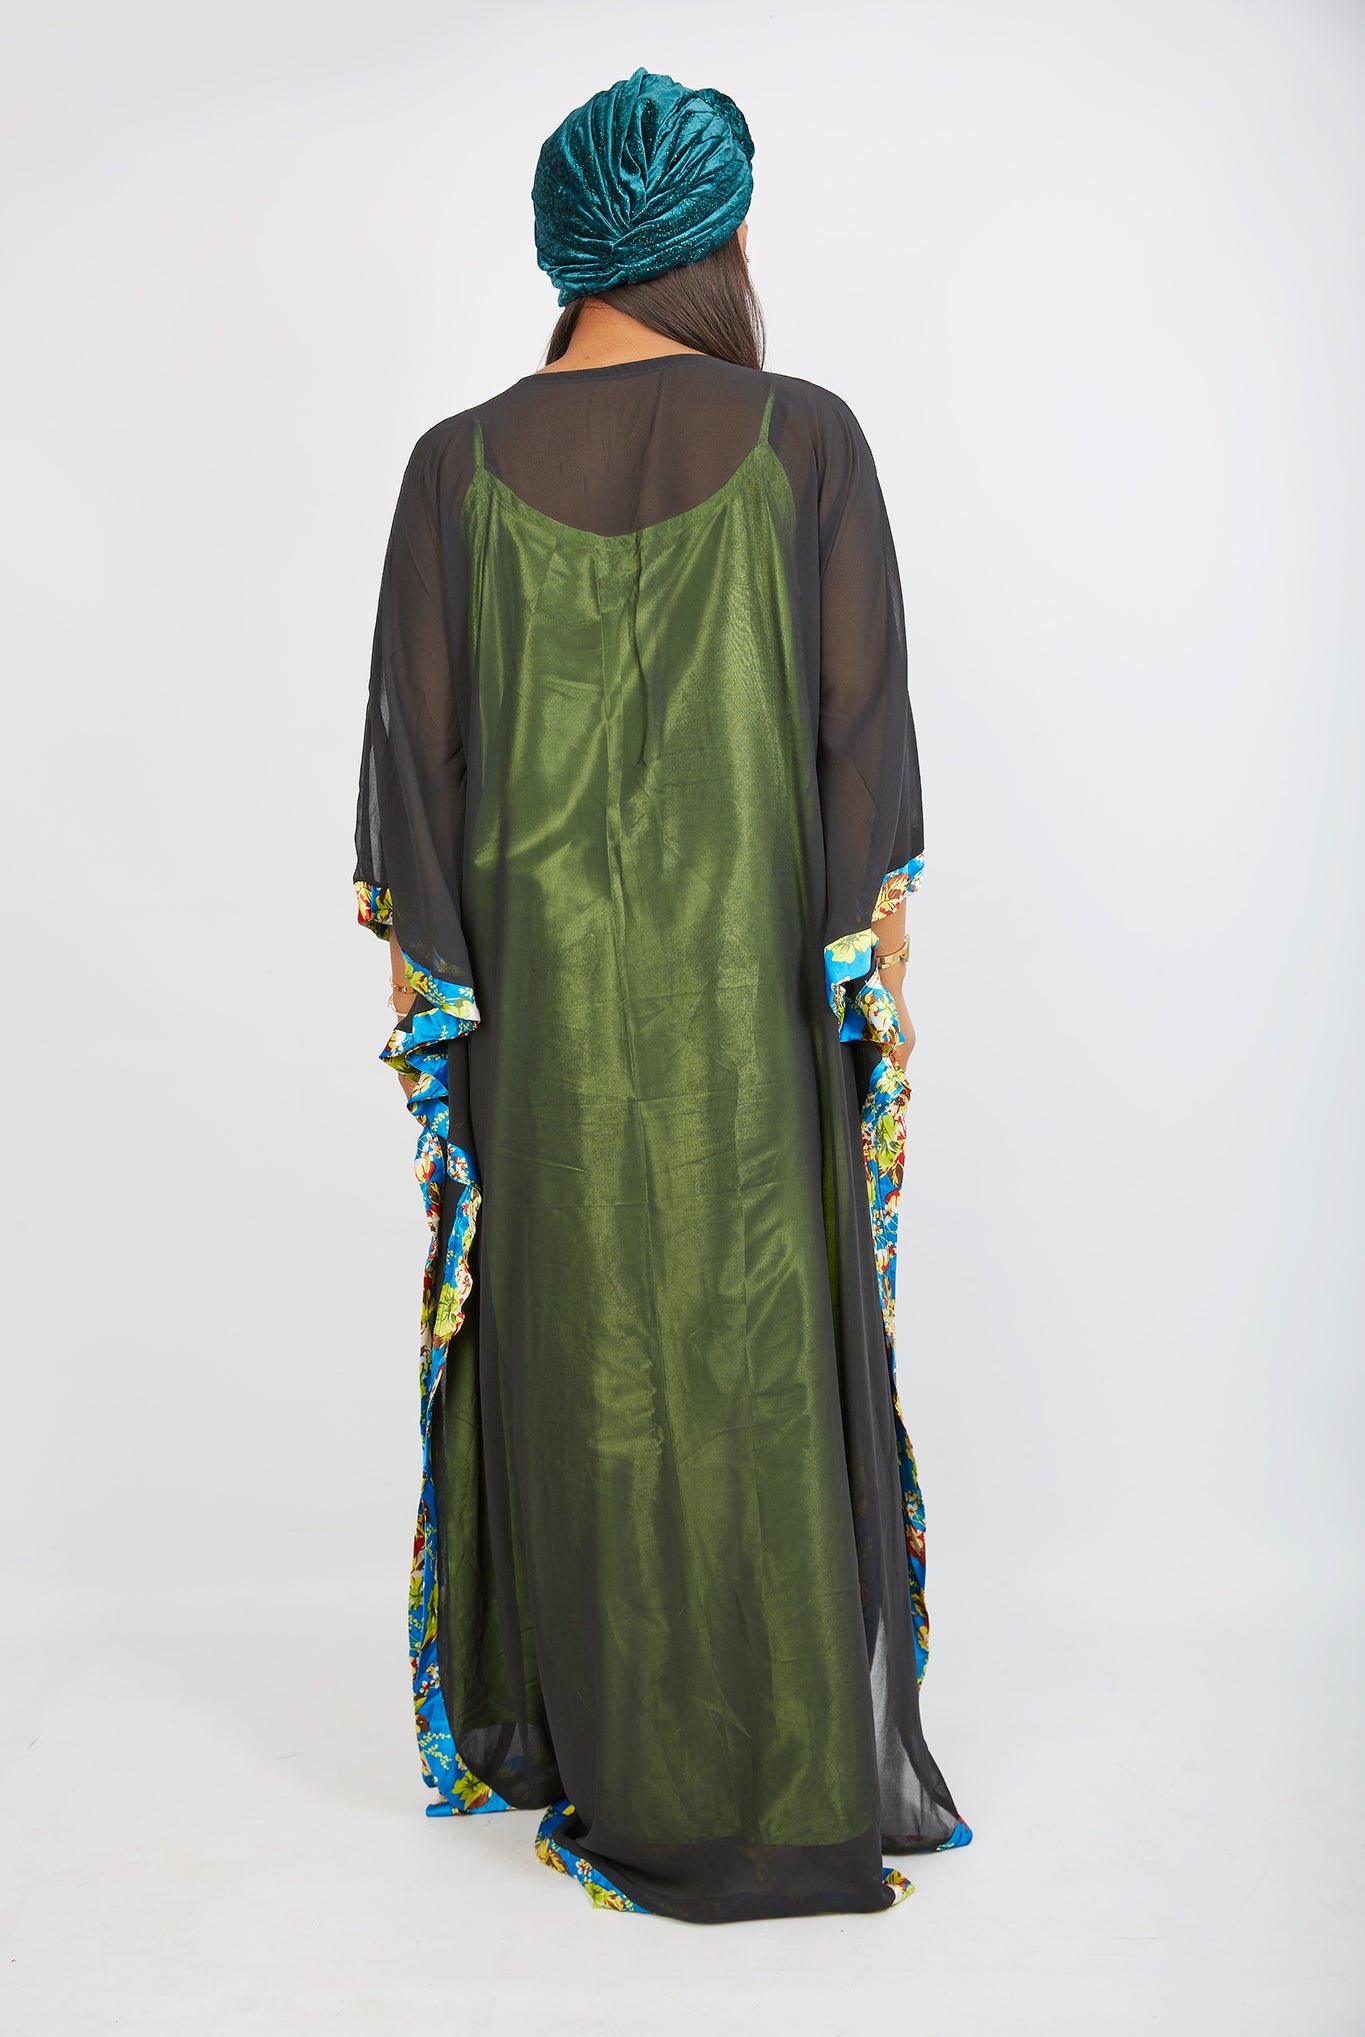 Shop African dresses, African maxi skirts, Dashiki shirts, African print shoes, handbags, and accessories.